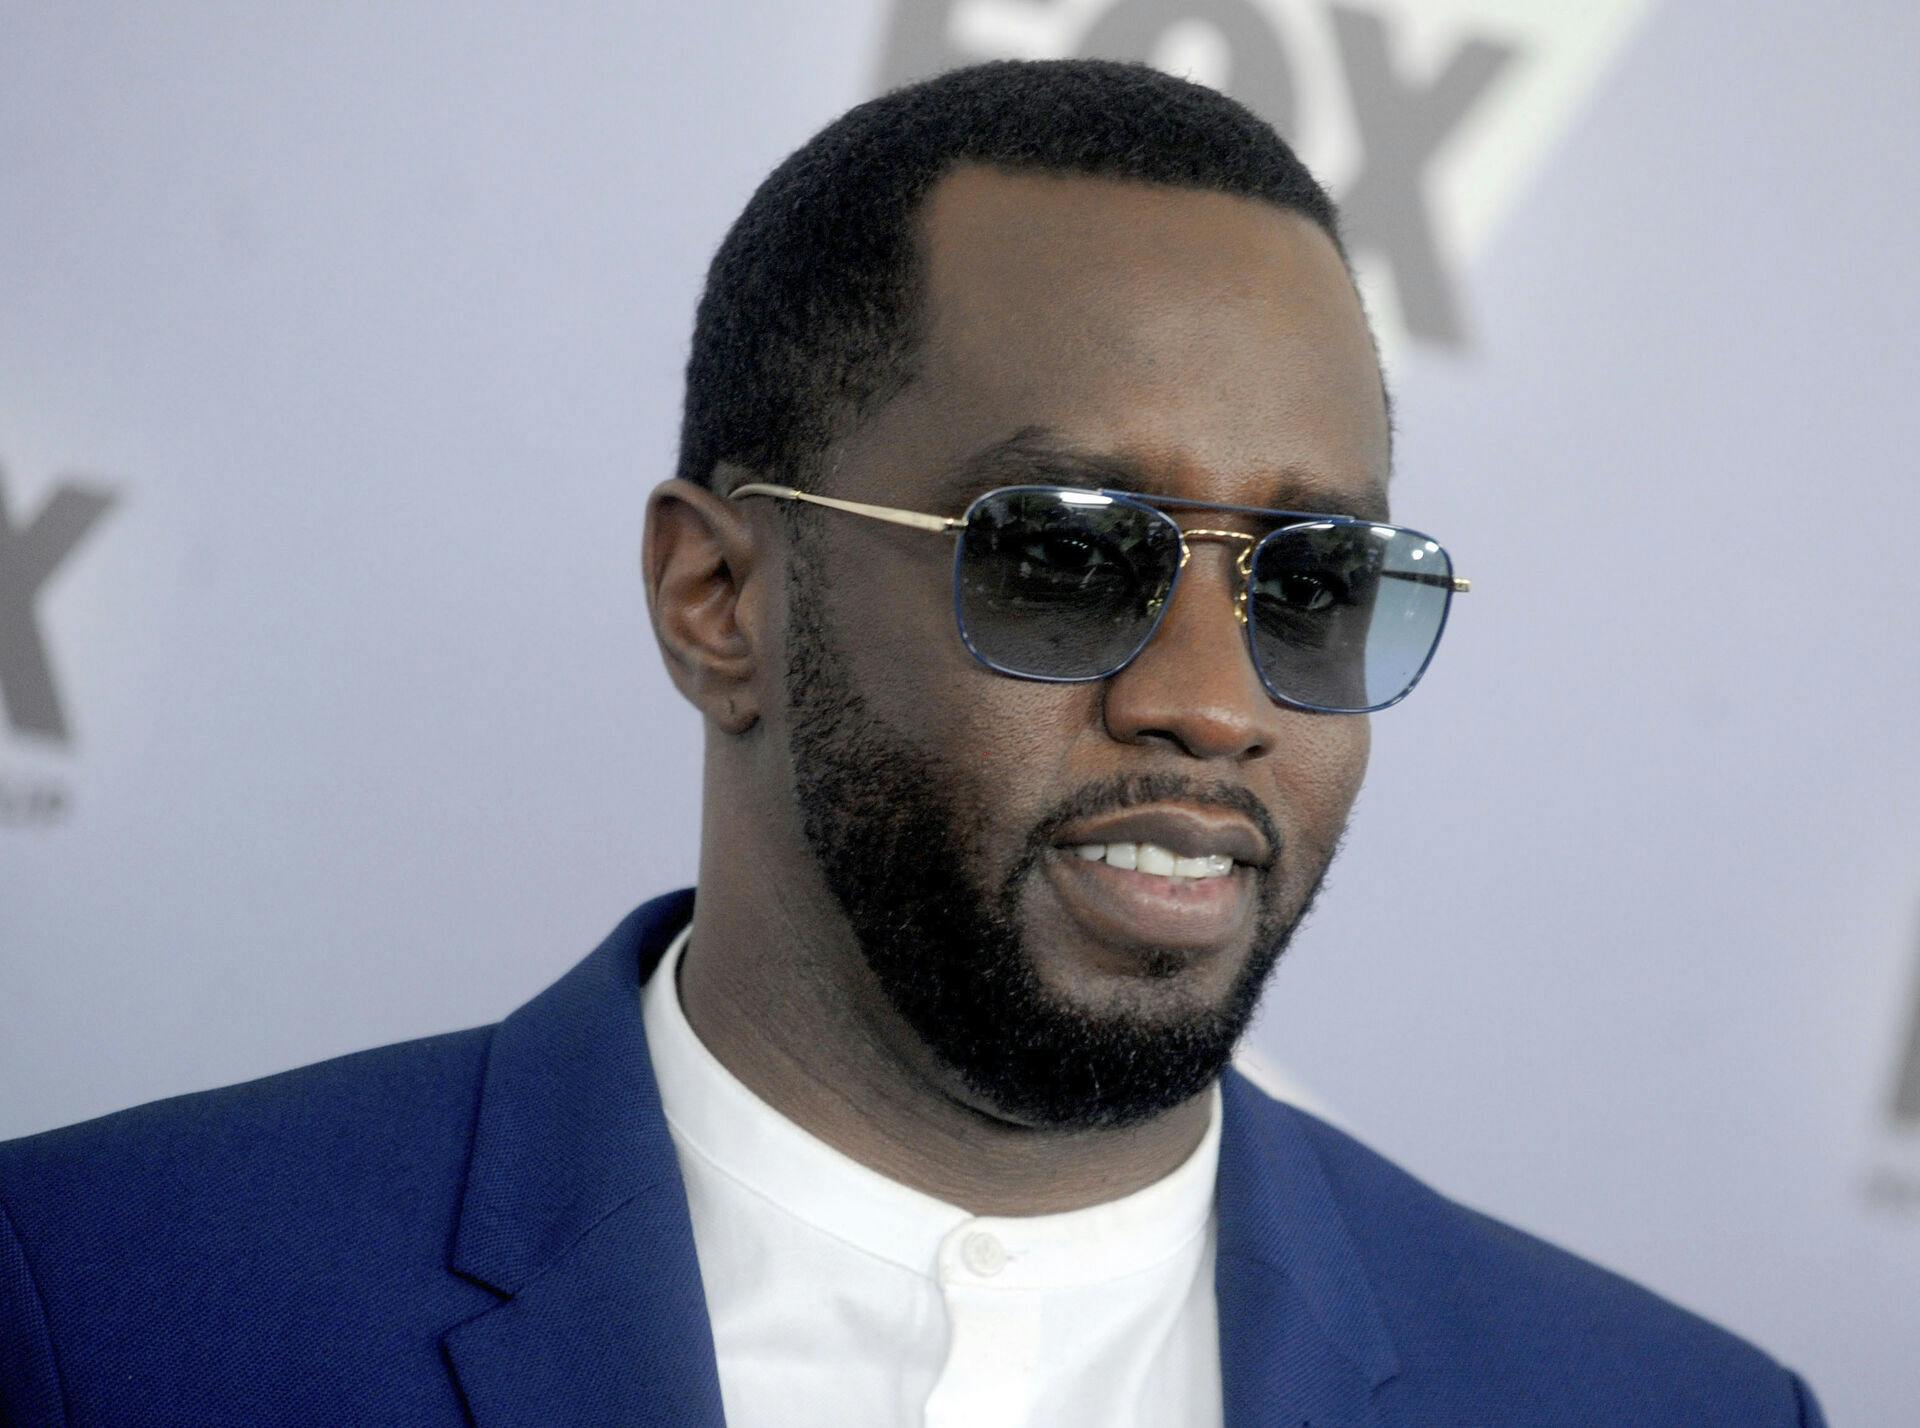 Photo by: Dennis Van Tine/STAR MAX/IPx 2018 5/14/18 Sean P. Diddy Combs at The 2018 Fox Network Upfront in New York City. (NYC)